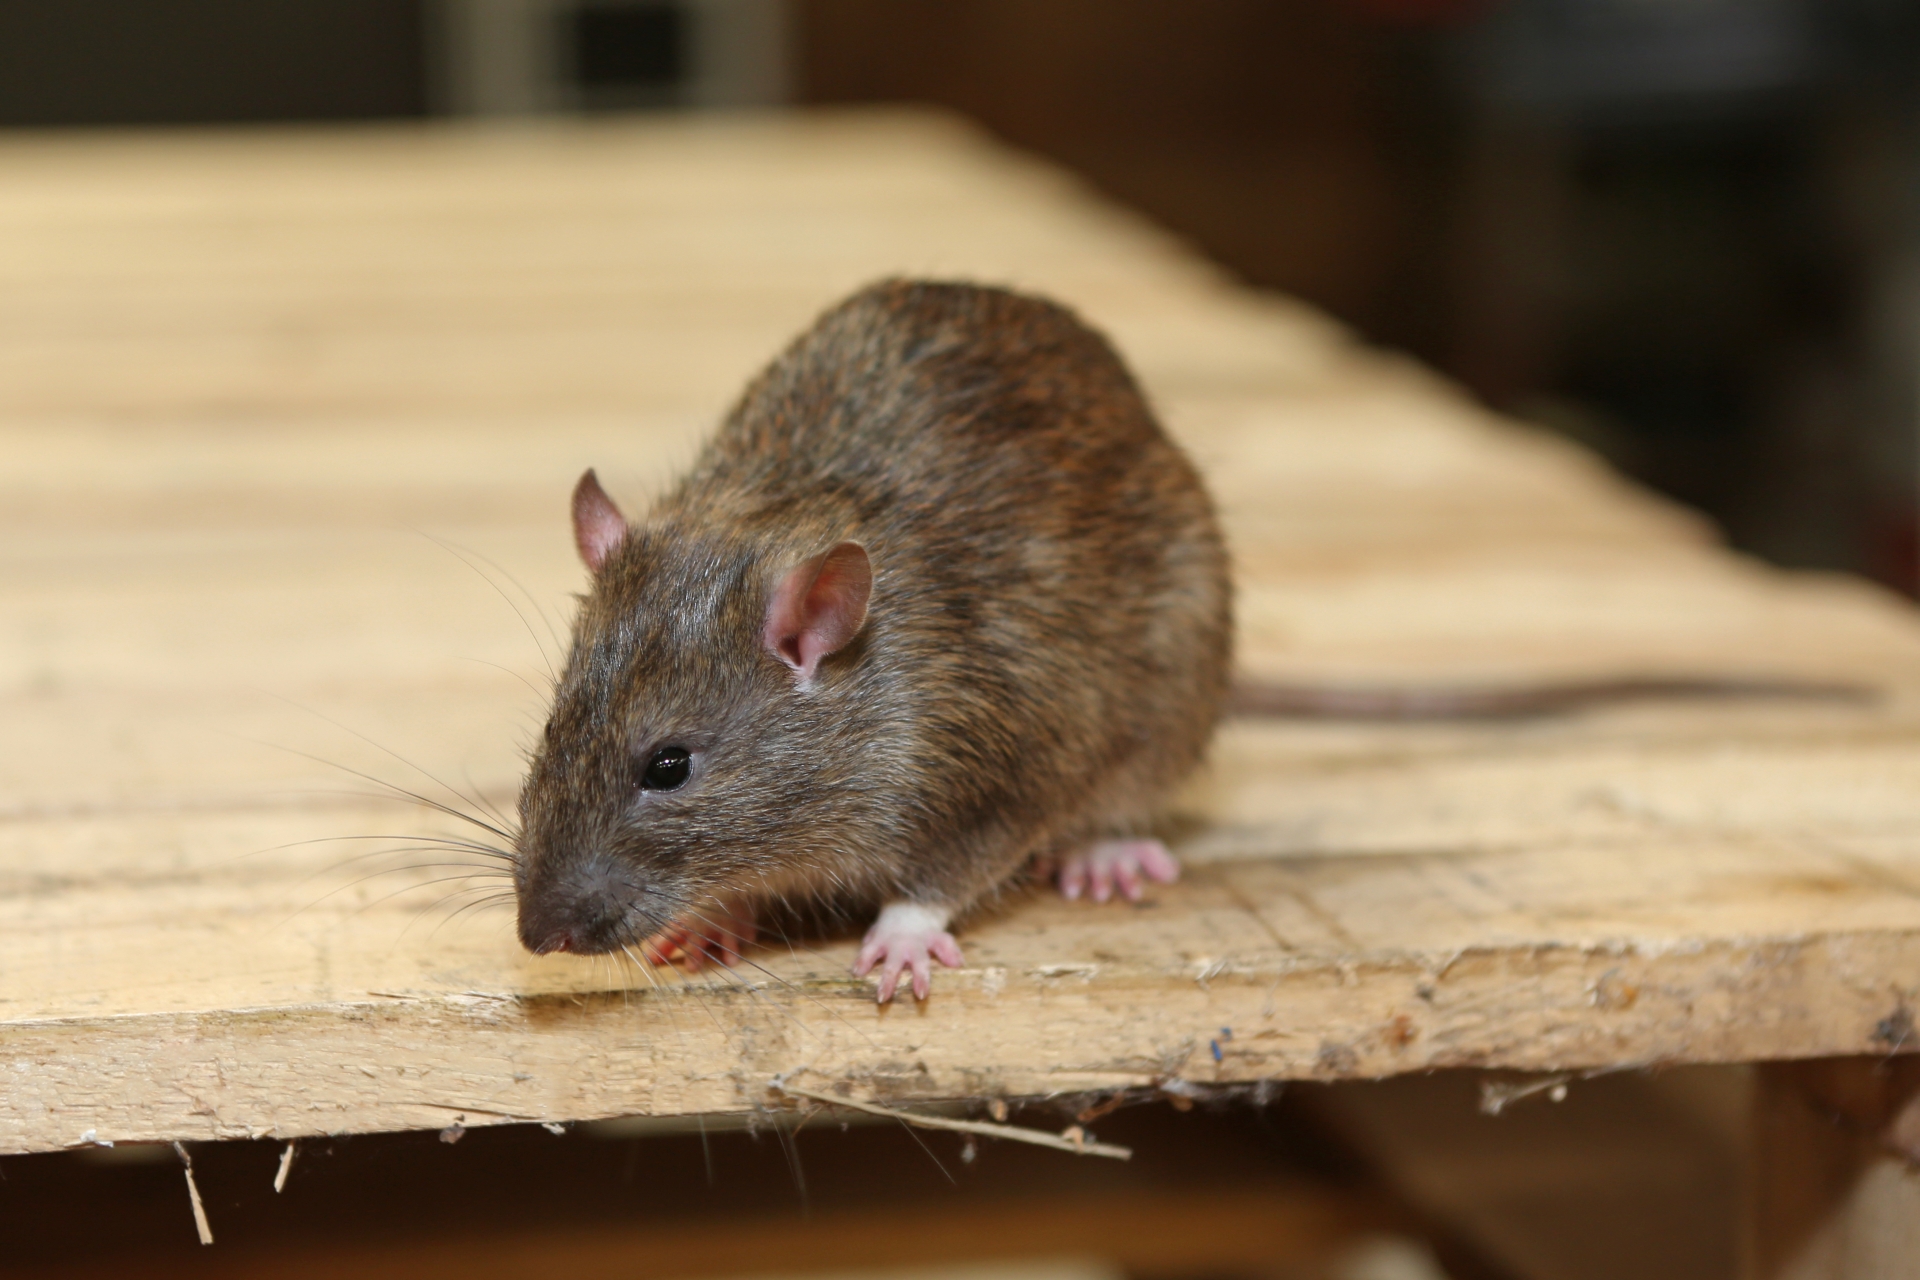 Rat Control, Pest Control in Holloway, N7 . Call Now 020 8166 9746